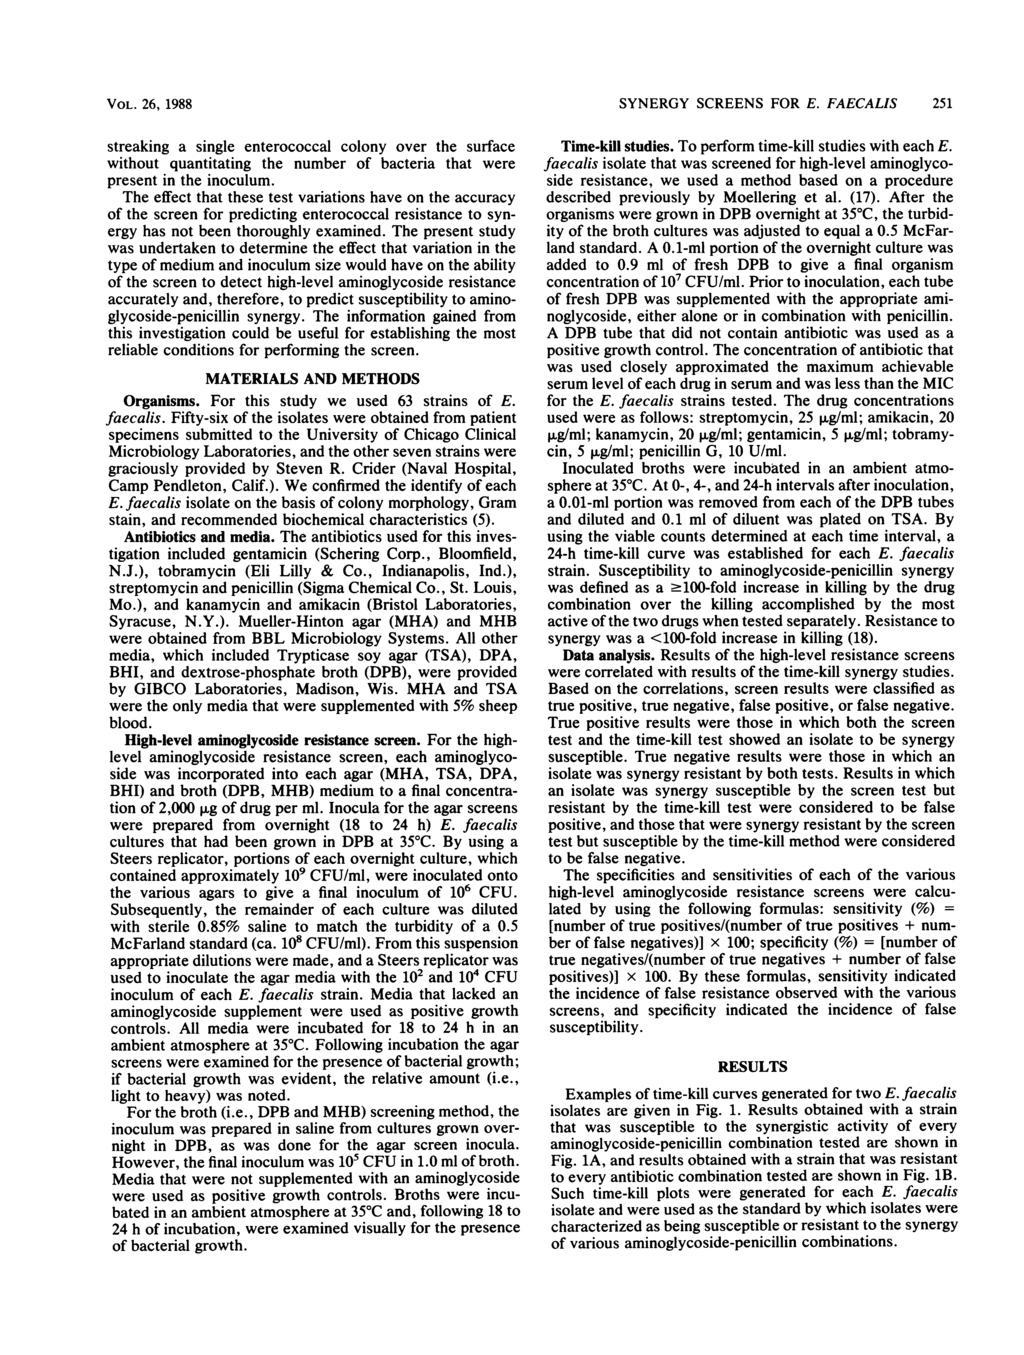 VOL. 26, 1988 streaking a single entercccal clny ver the surface withut quantitating the number f bacteria that were present in the inculum.